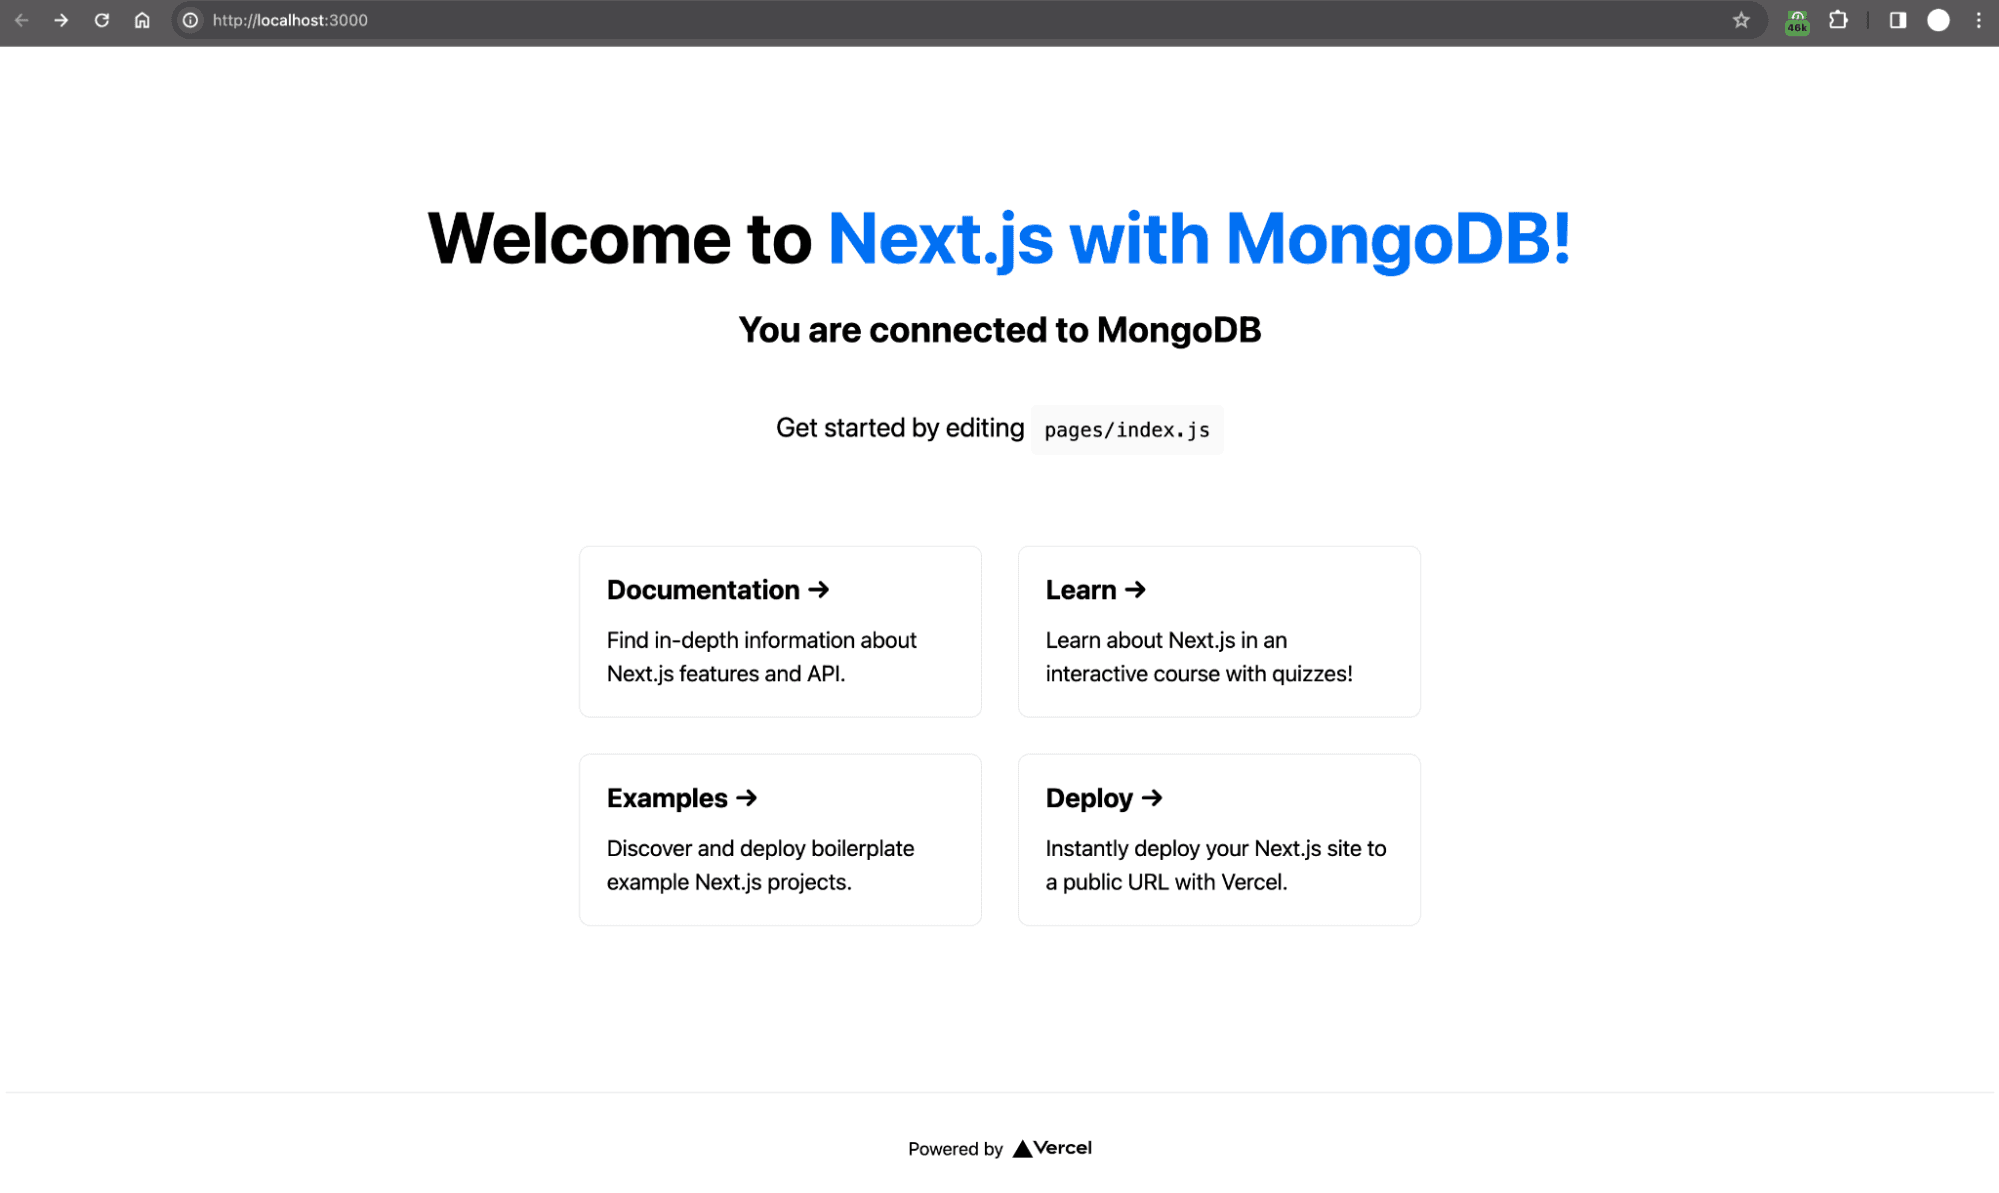 Welcome to Next.js